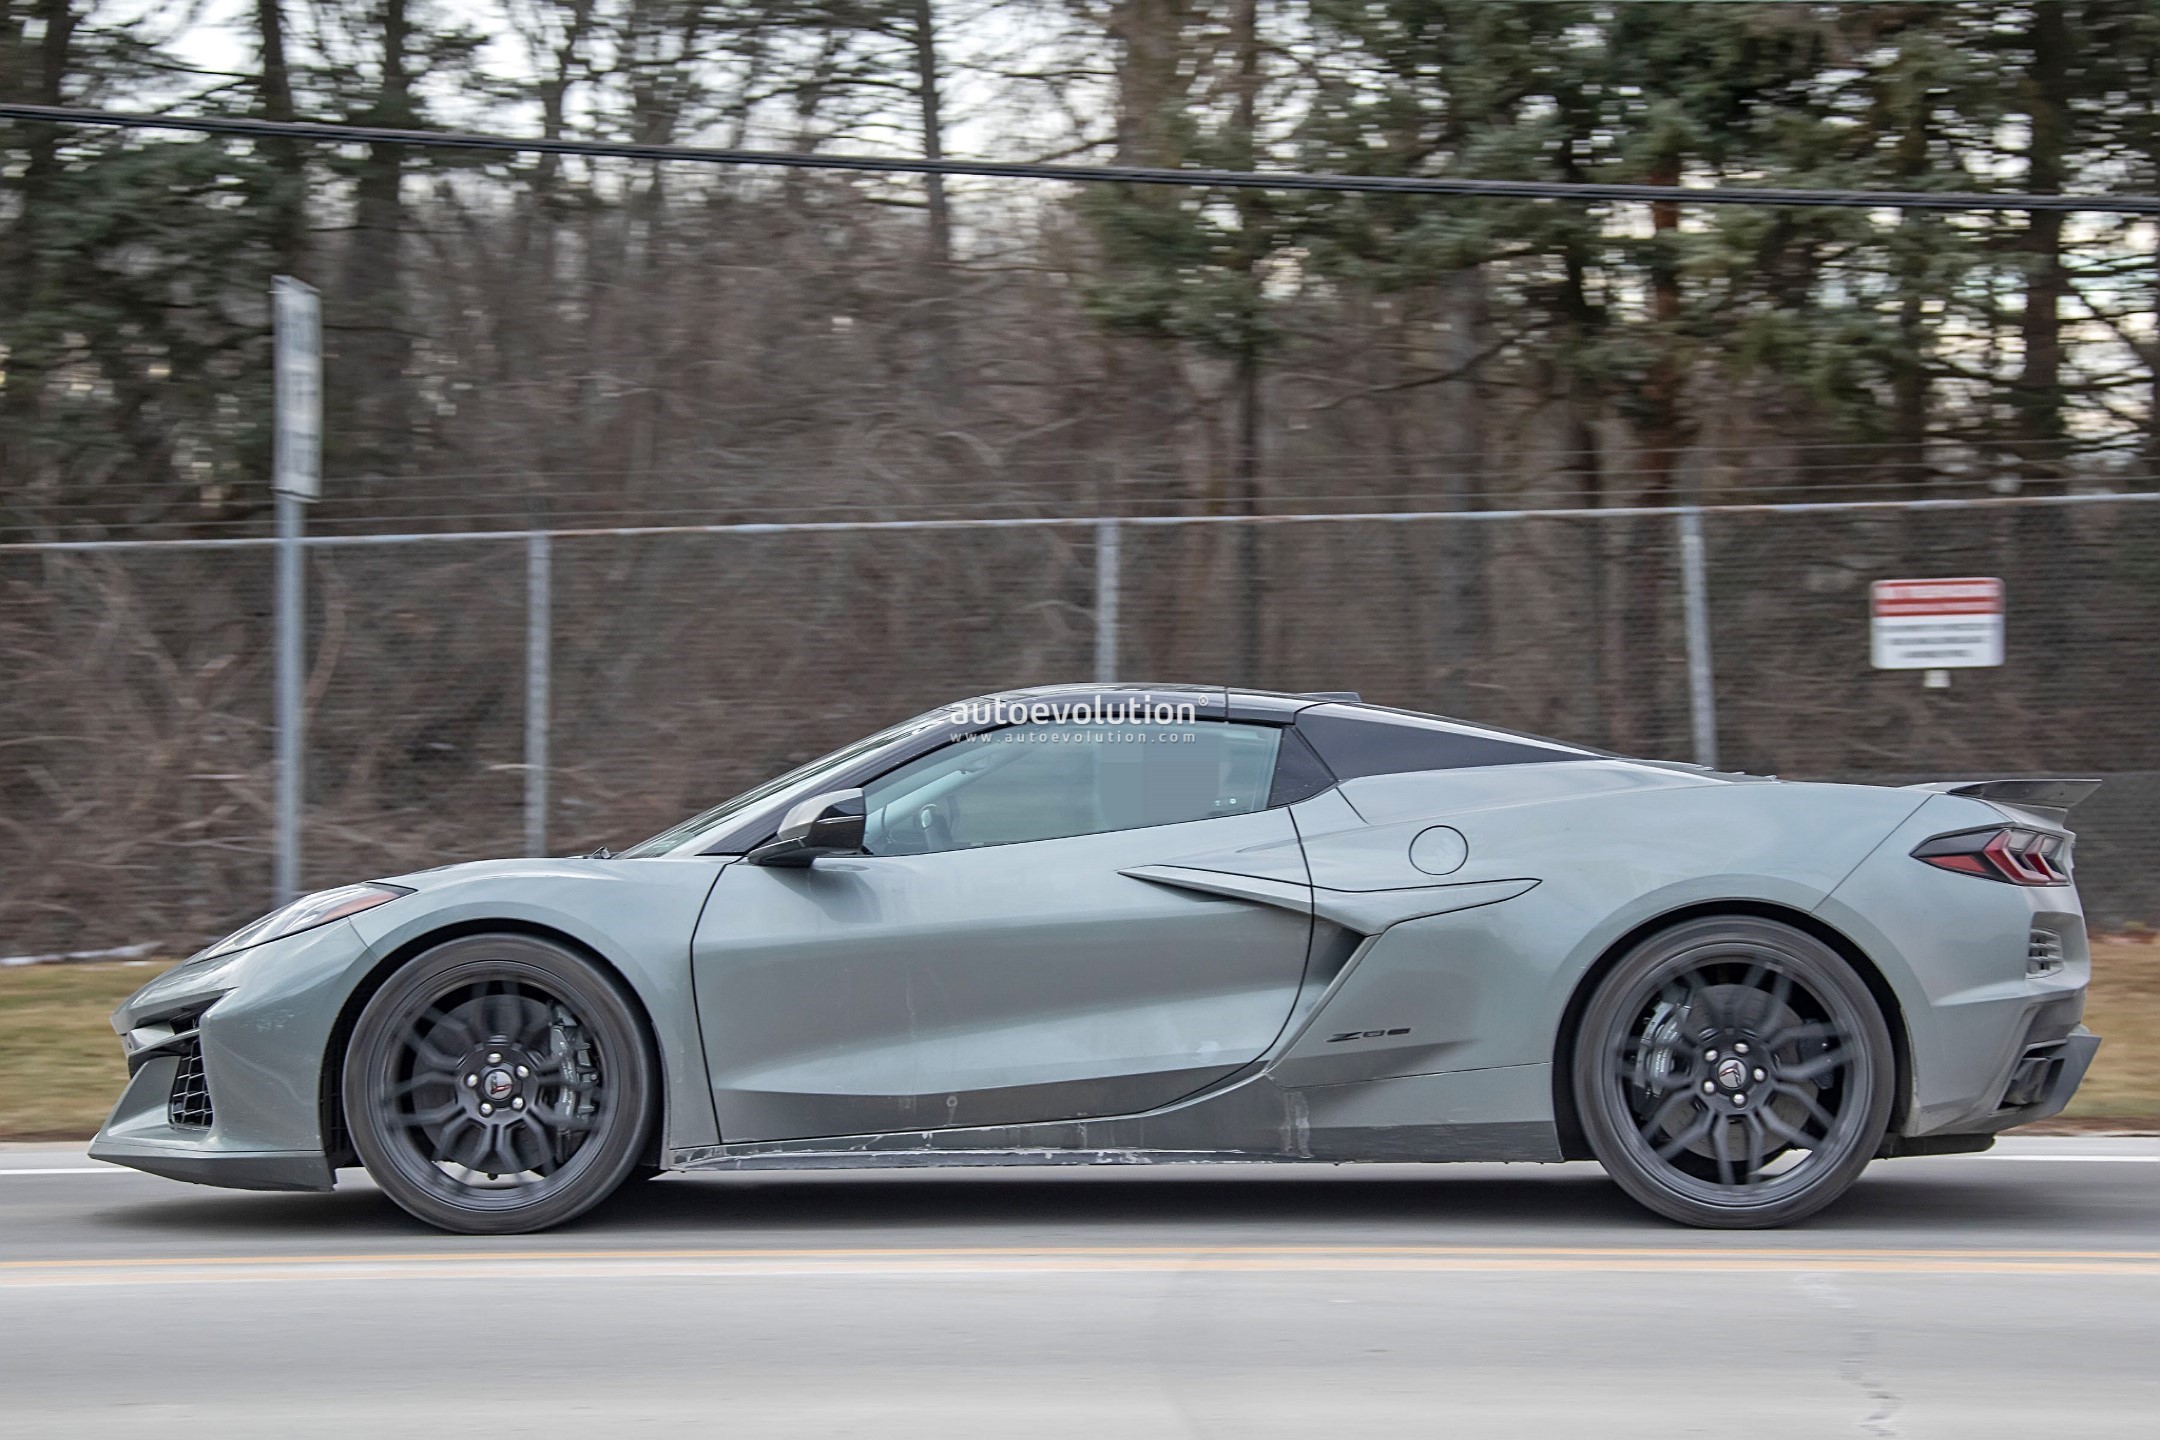 2024 Chevrolet Corvette ERay Spied Without Any Camouflage, It’s Wider